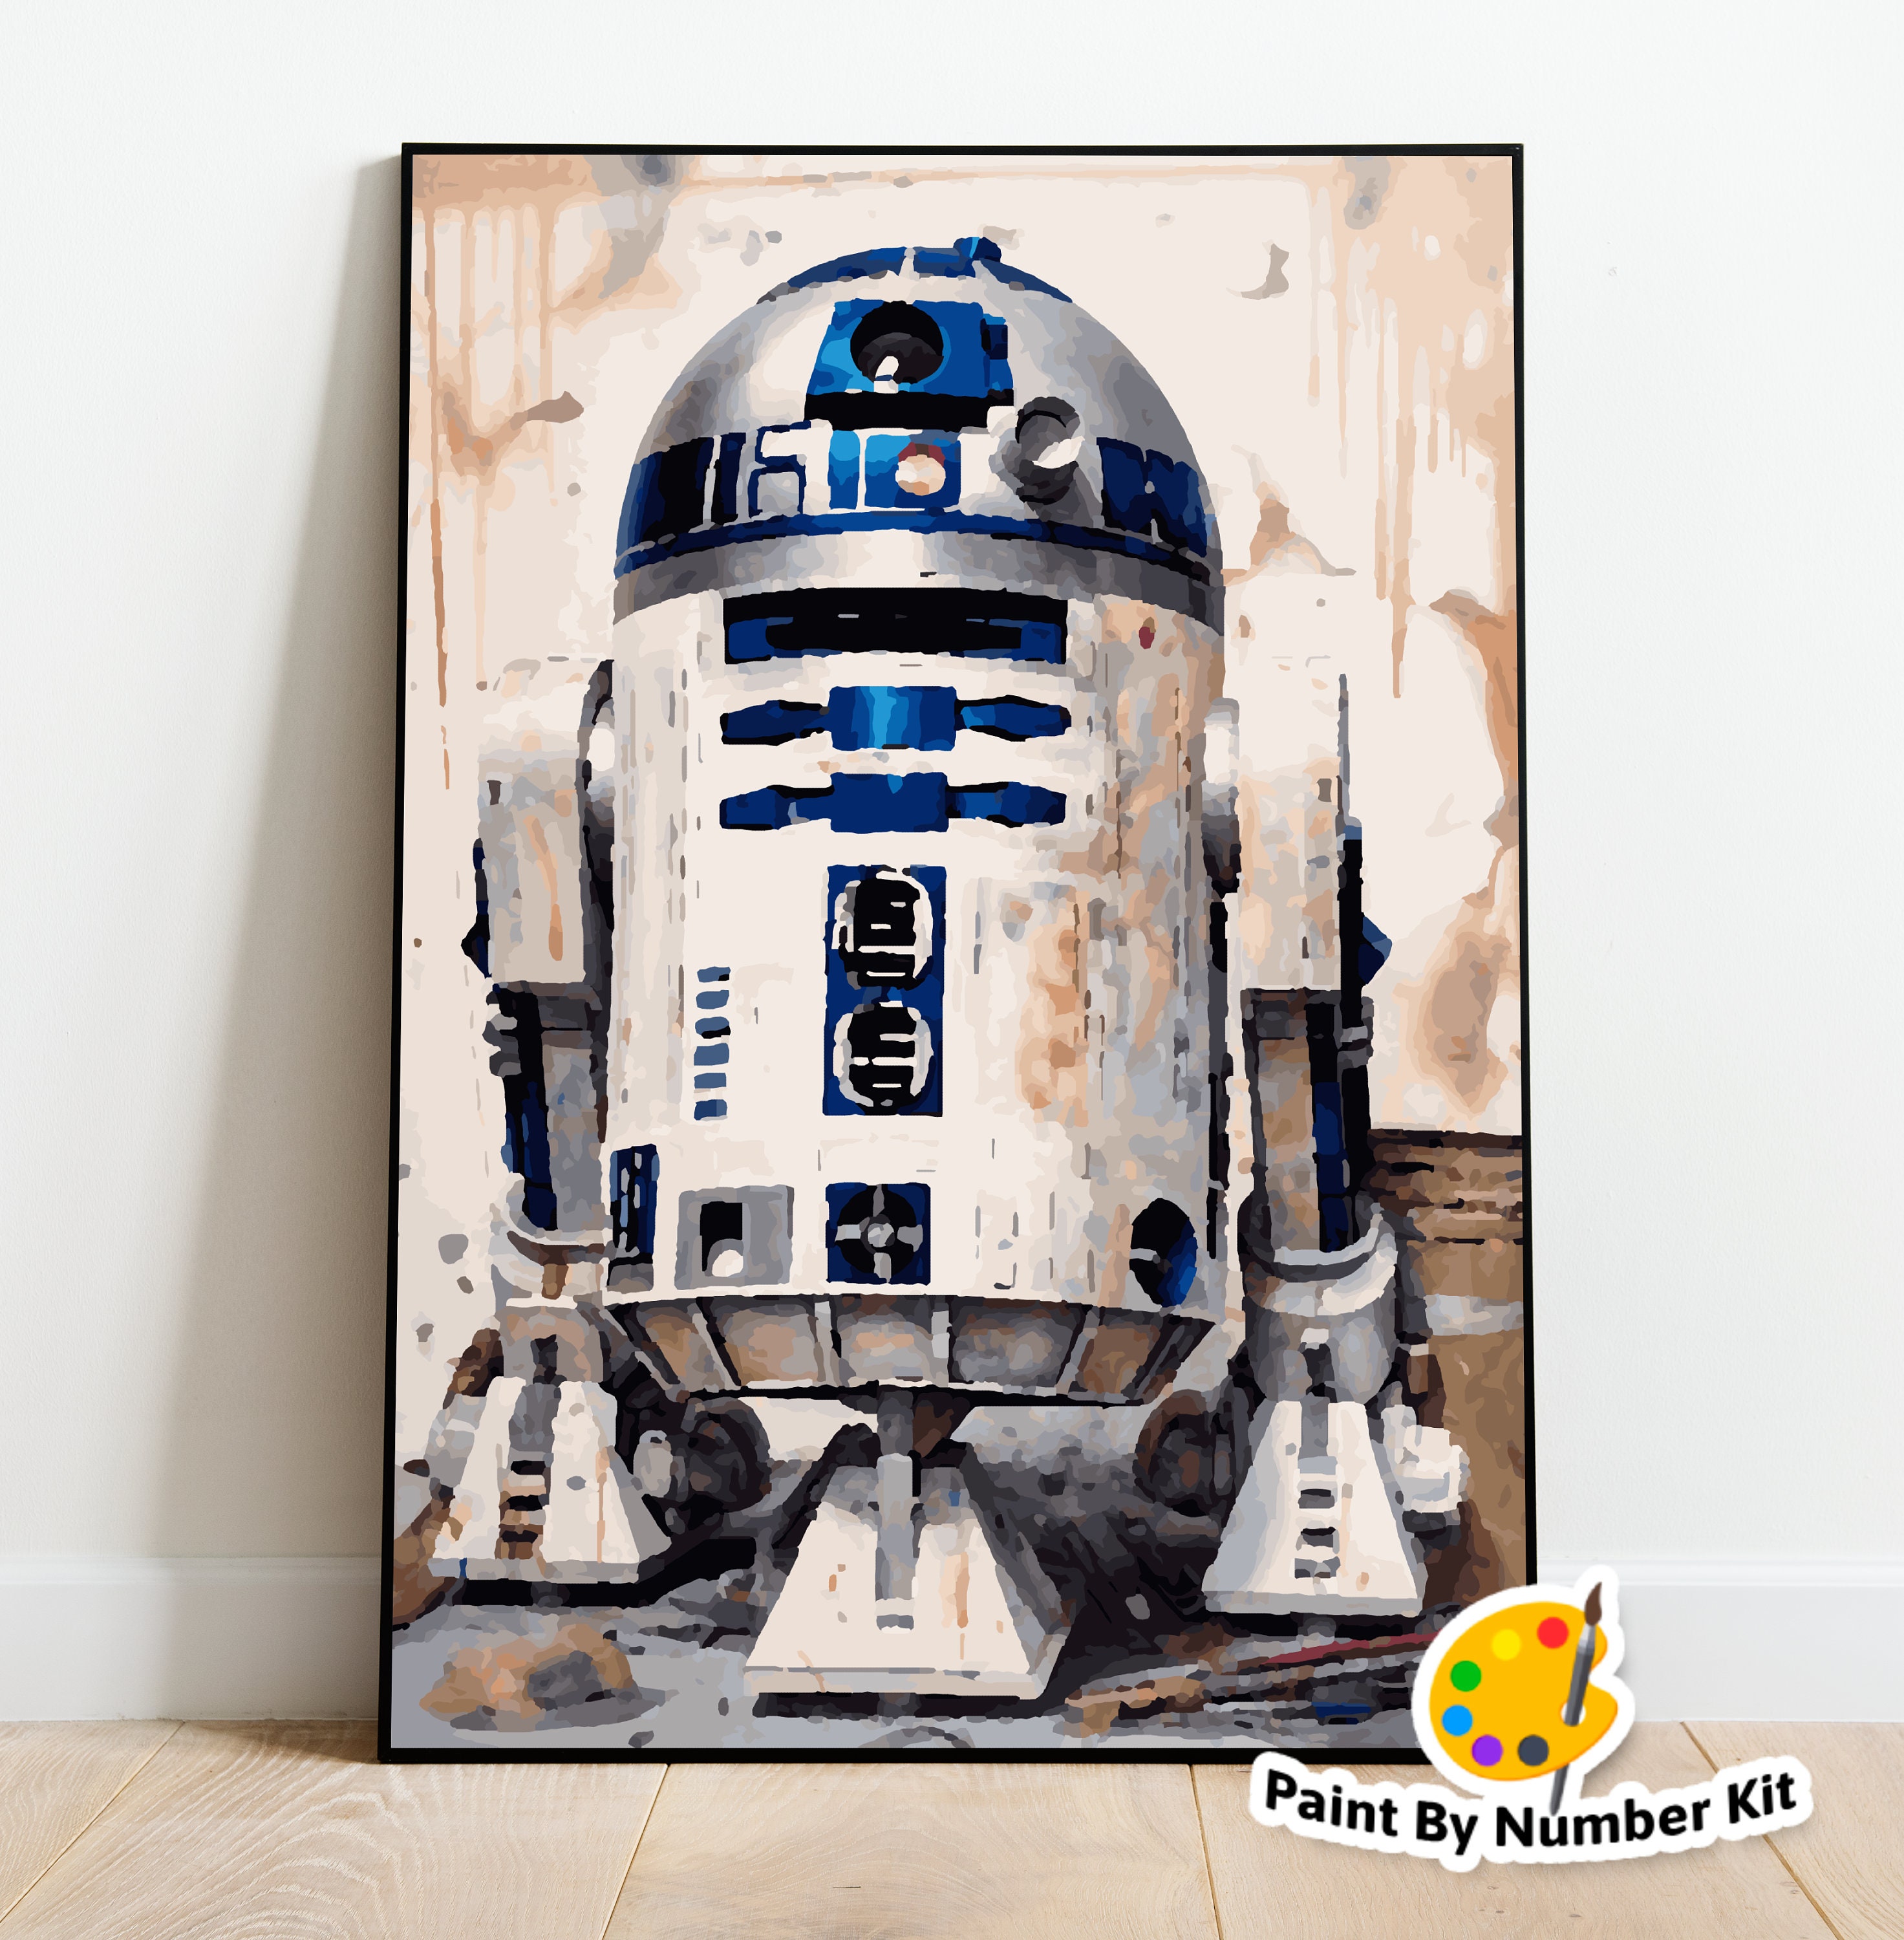 Star Wars Darth – Paint By Number